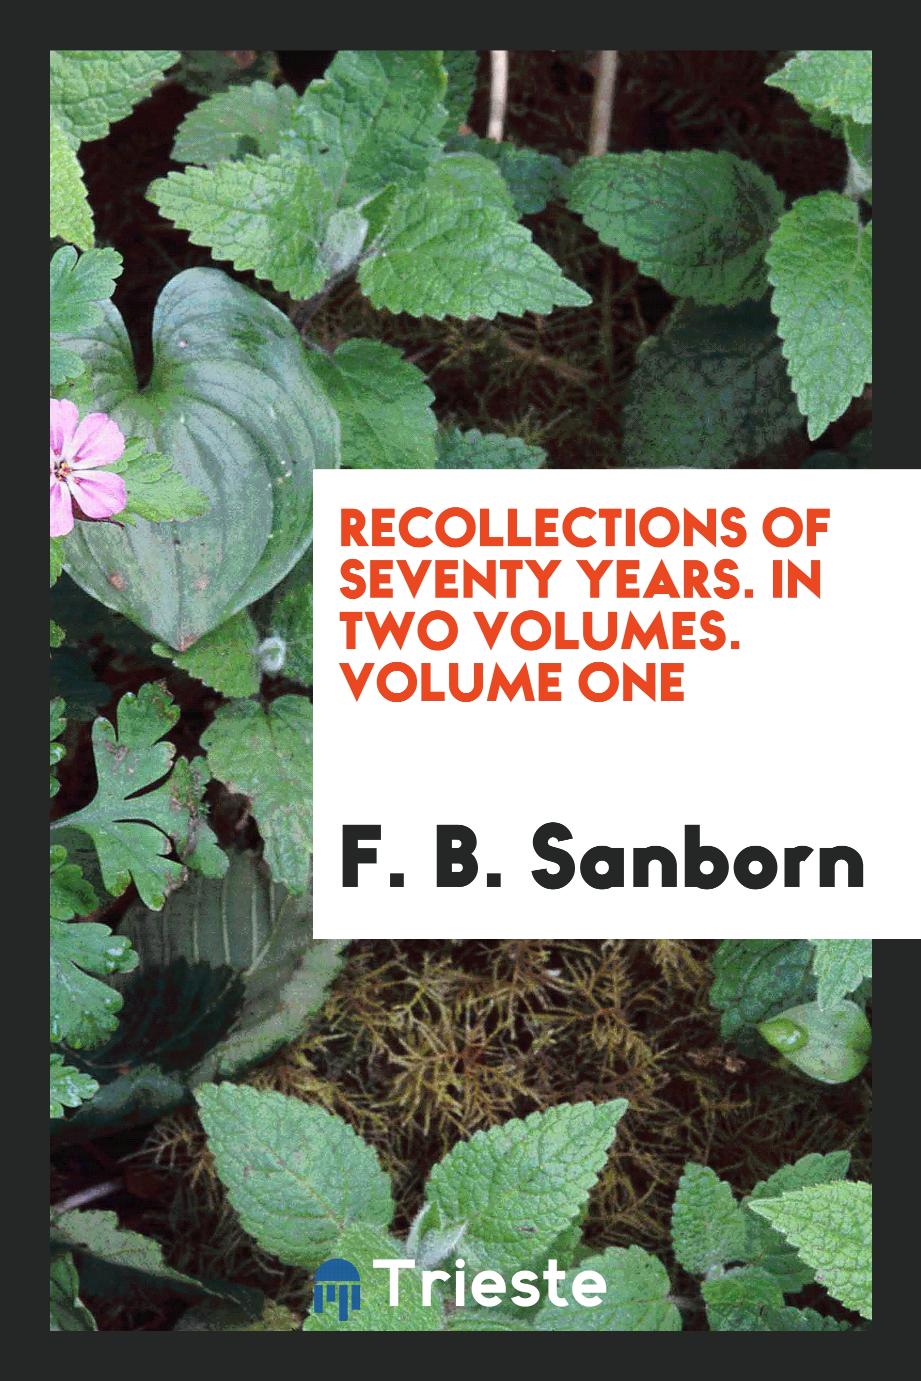 Recollections of seventy years. In two volumes. Volume one